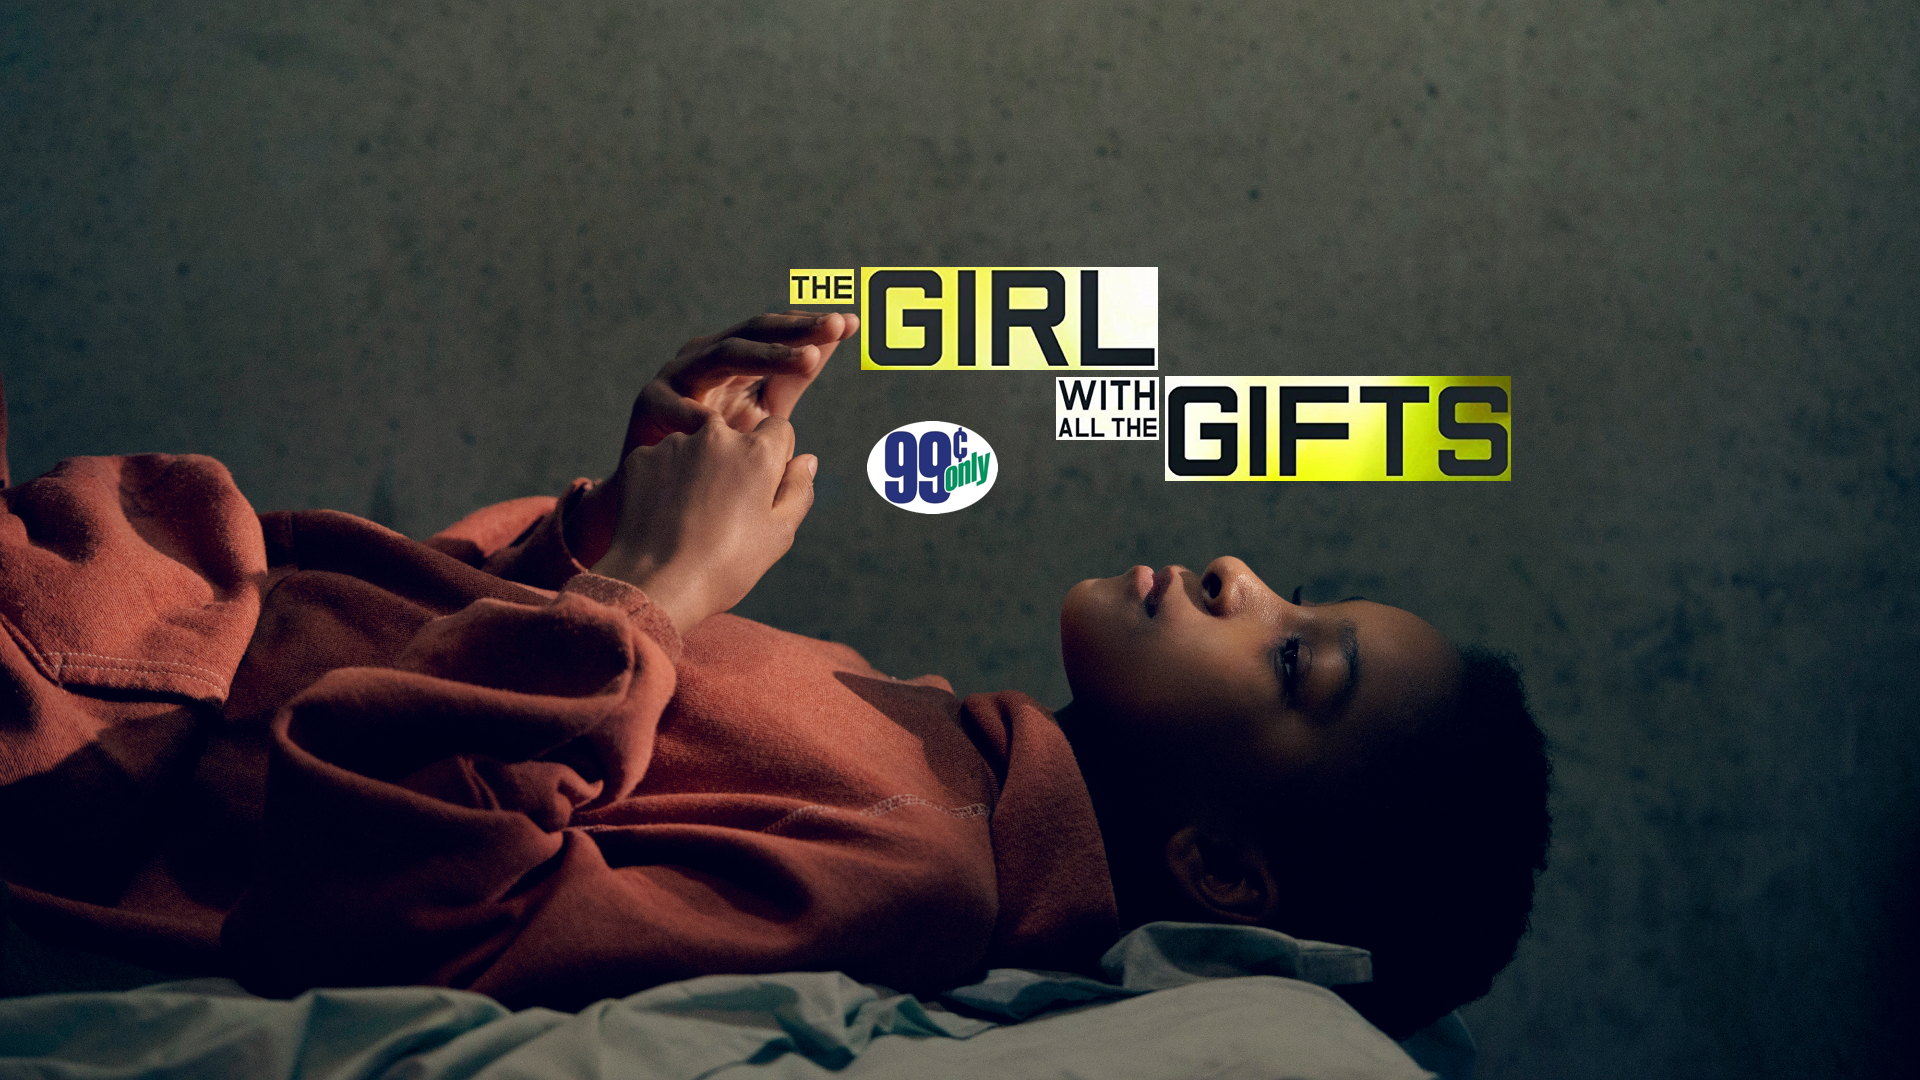 Geek insider, geekinsider, geekinsider. Com,, the (other) itunes $0. 99 movie of the week: 'the girl with all the gifts', entertainment